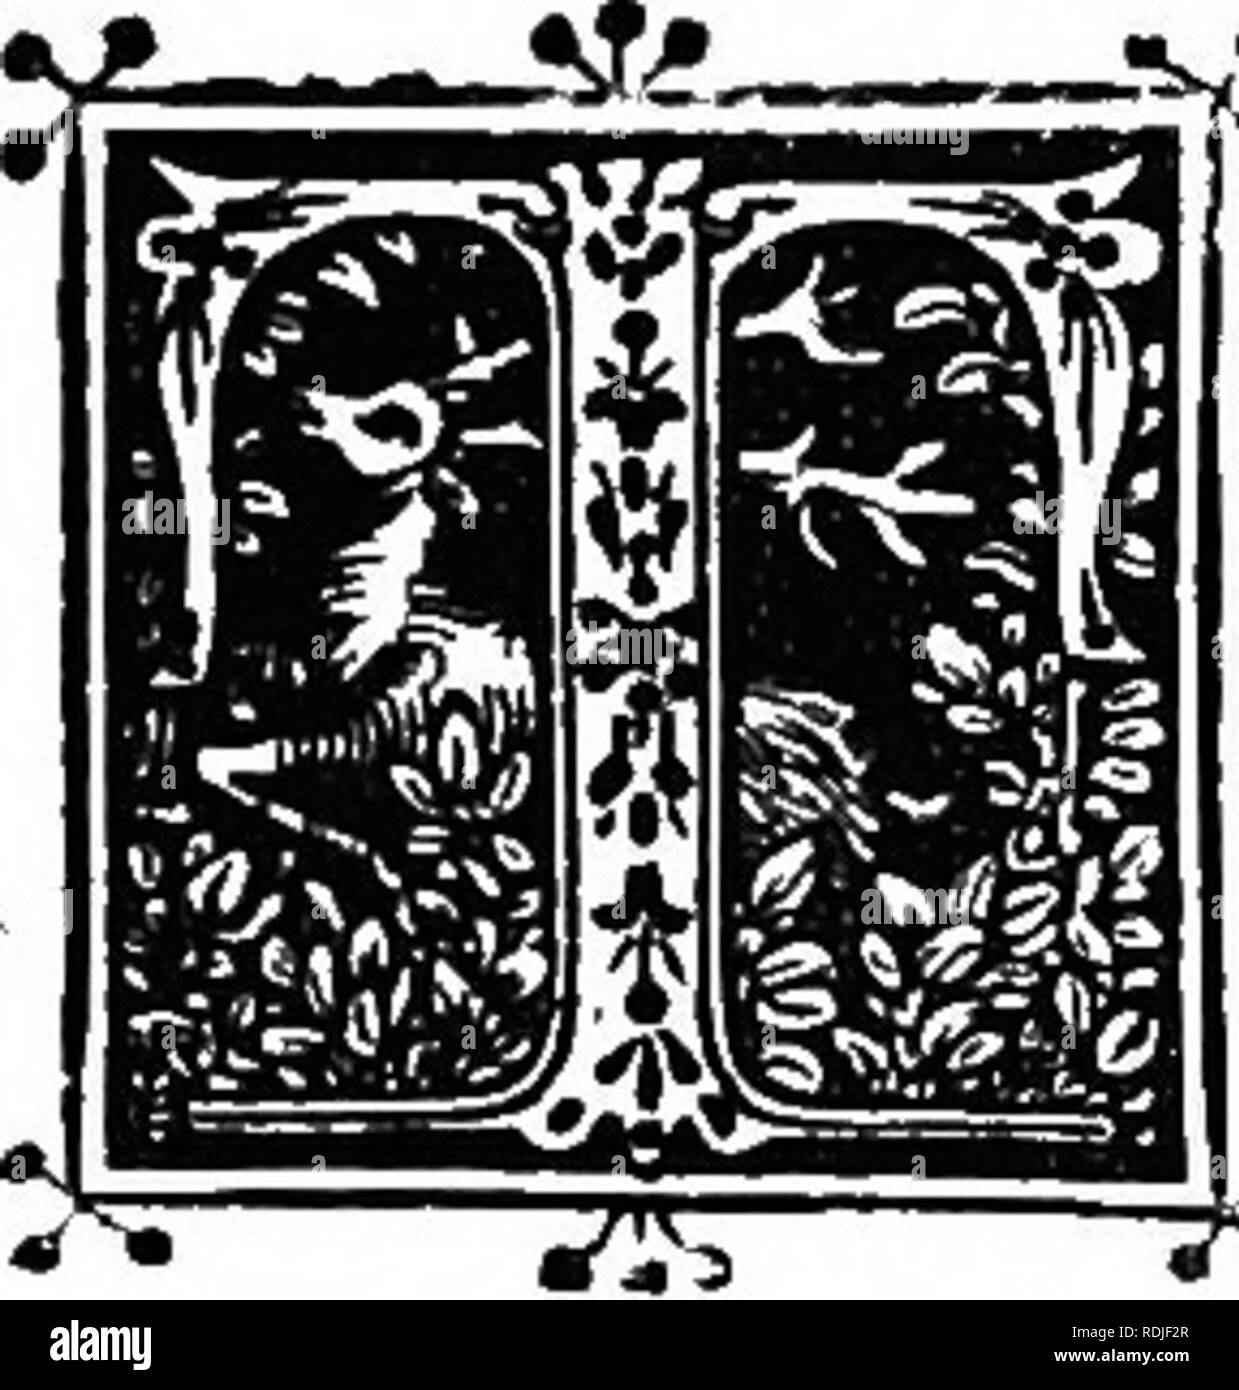 . The boke of Saint Albans. Falconry; Hunting; Heraldry; Incunabula. CHAPTER IV. Pi)ilologg.. HERE is a ftrongly marked individuality in the fpelling throughout all the treatifes in this work. If the Hunting rhymes belong to Dam Julyans, their ortho- graphy, like the profe portions, is that of the School- mafter, who appears to have been a North-countryman, many words leading to that conclufion. The formation of the plural by adding the letters &quot; is &quot; or &quot; ys &quot; ftrikes the attention at once. Thus the plural of bells is bellis; egg, eggis ; vetch, fetchis ; fulmert, ful- mer Stock Photo